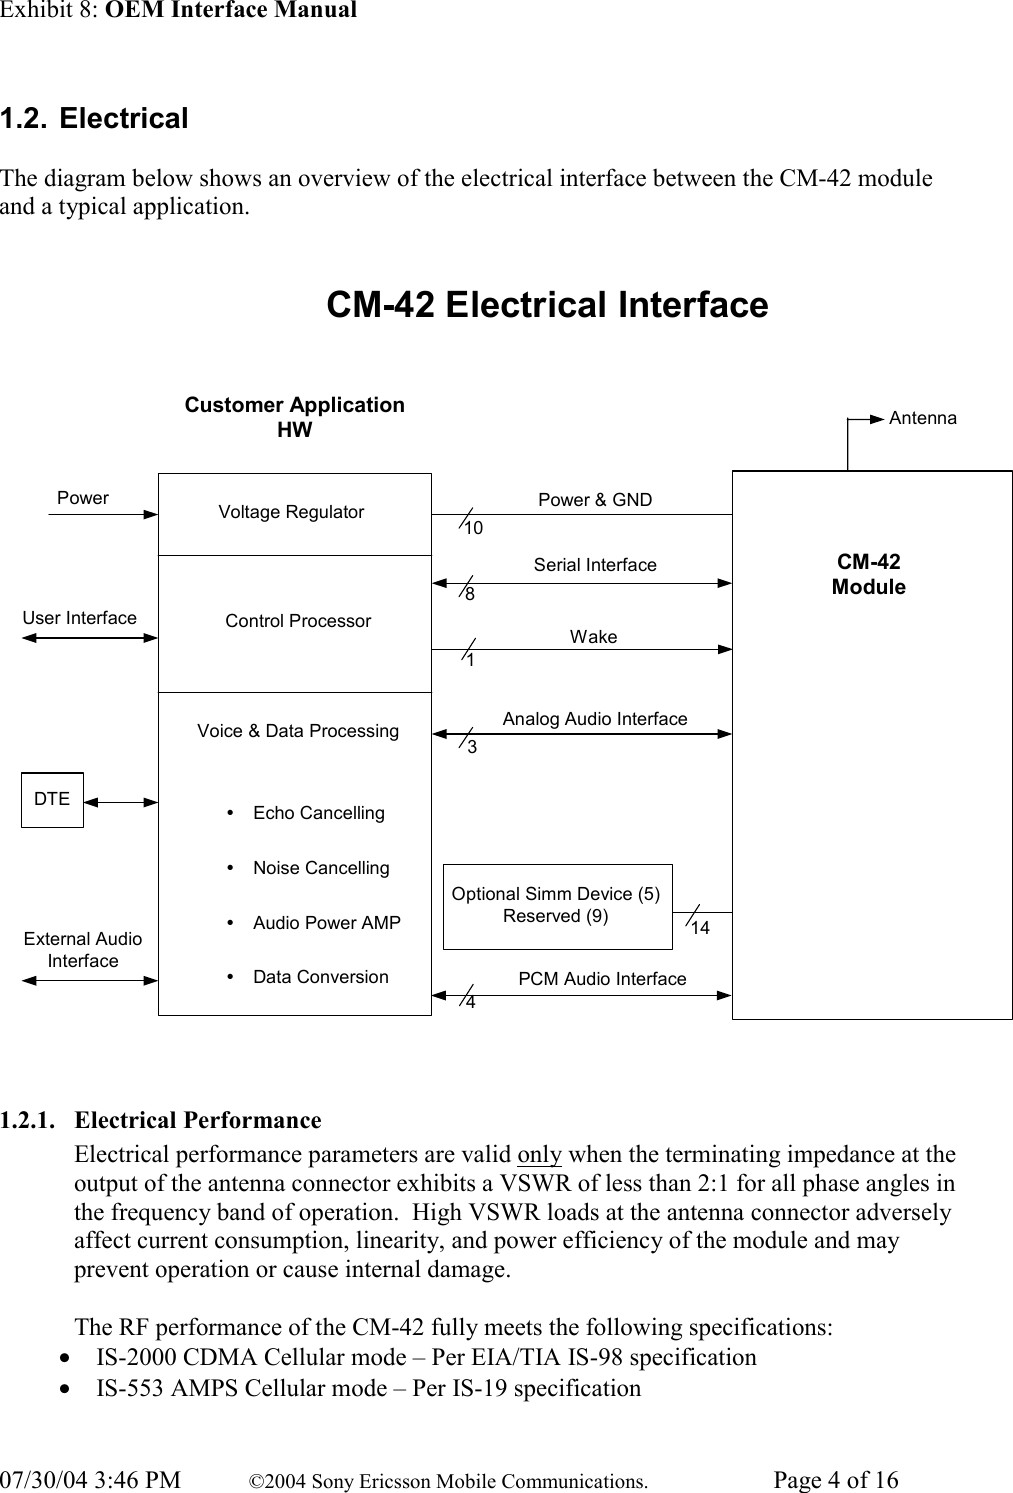 Exhibit 8: OEM Interface Manual 07/30/04 3:46 PM  ©2004 Sony Ericsson Mobile Communications.  Page 4 of 16 1.2. Electrical  The diagram below shows an overview of the electrical interface between the CM-42 module and a typical application.  CM-42 Electrical InterfaceCustomer ApplicationHWVoltage RegulatorControl ProcessorVoice &amp; Data ProcessingyEcho CancellingyNoise CancellingyAudio Power AMPyData ConversionDTEPowerExternal AudioInterfaceAntennaUser Interface8Power &amp; GNDSerial InterfaceWakeAnalog Audio Interface1013144Optional Simm Device (5)Reserved (9)CM-42ModulePCM Audio Interface  1.2.1. Electrical Performance Electrical performance parameters are valid only when the terminating impedance at the output of the antenna connector exhibits a VSWR of less than 2:1 for all phase angles in the frequency band of operation.  High VSWR loads at the antenna connector adversely affect current consumption, linearity, and power efficiency of the module and may prevent operation or cause internal damage.  The RF performance of the CM-42 fully meets the following specifications: • IS-2000 CDMA Cellular mode – Per EIA/TIA IS-98 specification • IS-553 AMPS Cellular mode – Per IS-19 specification  